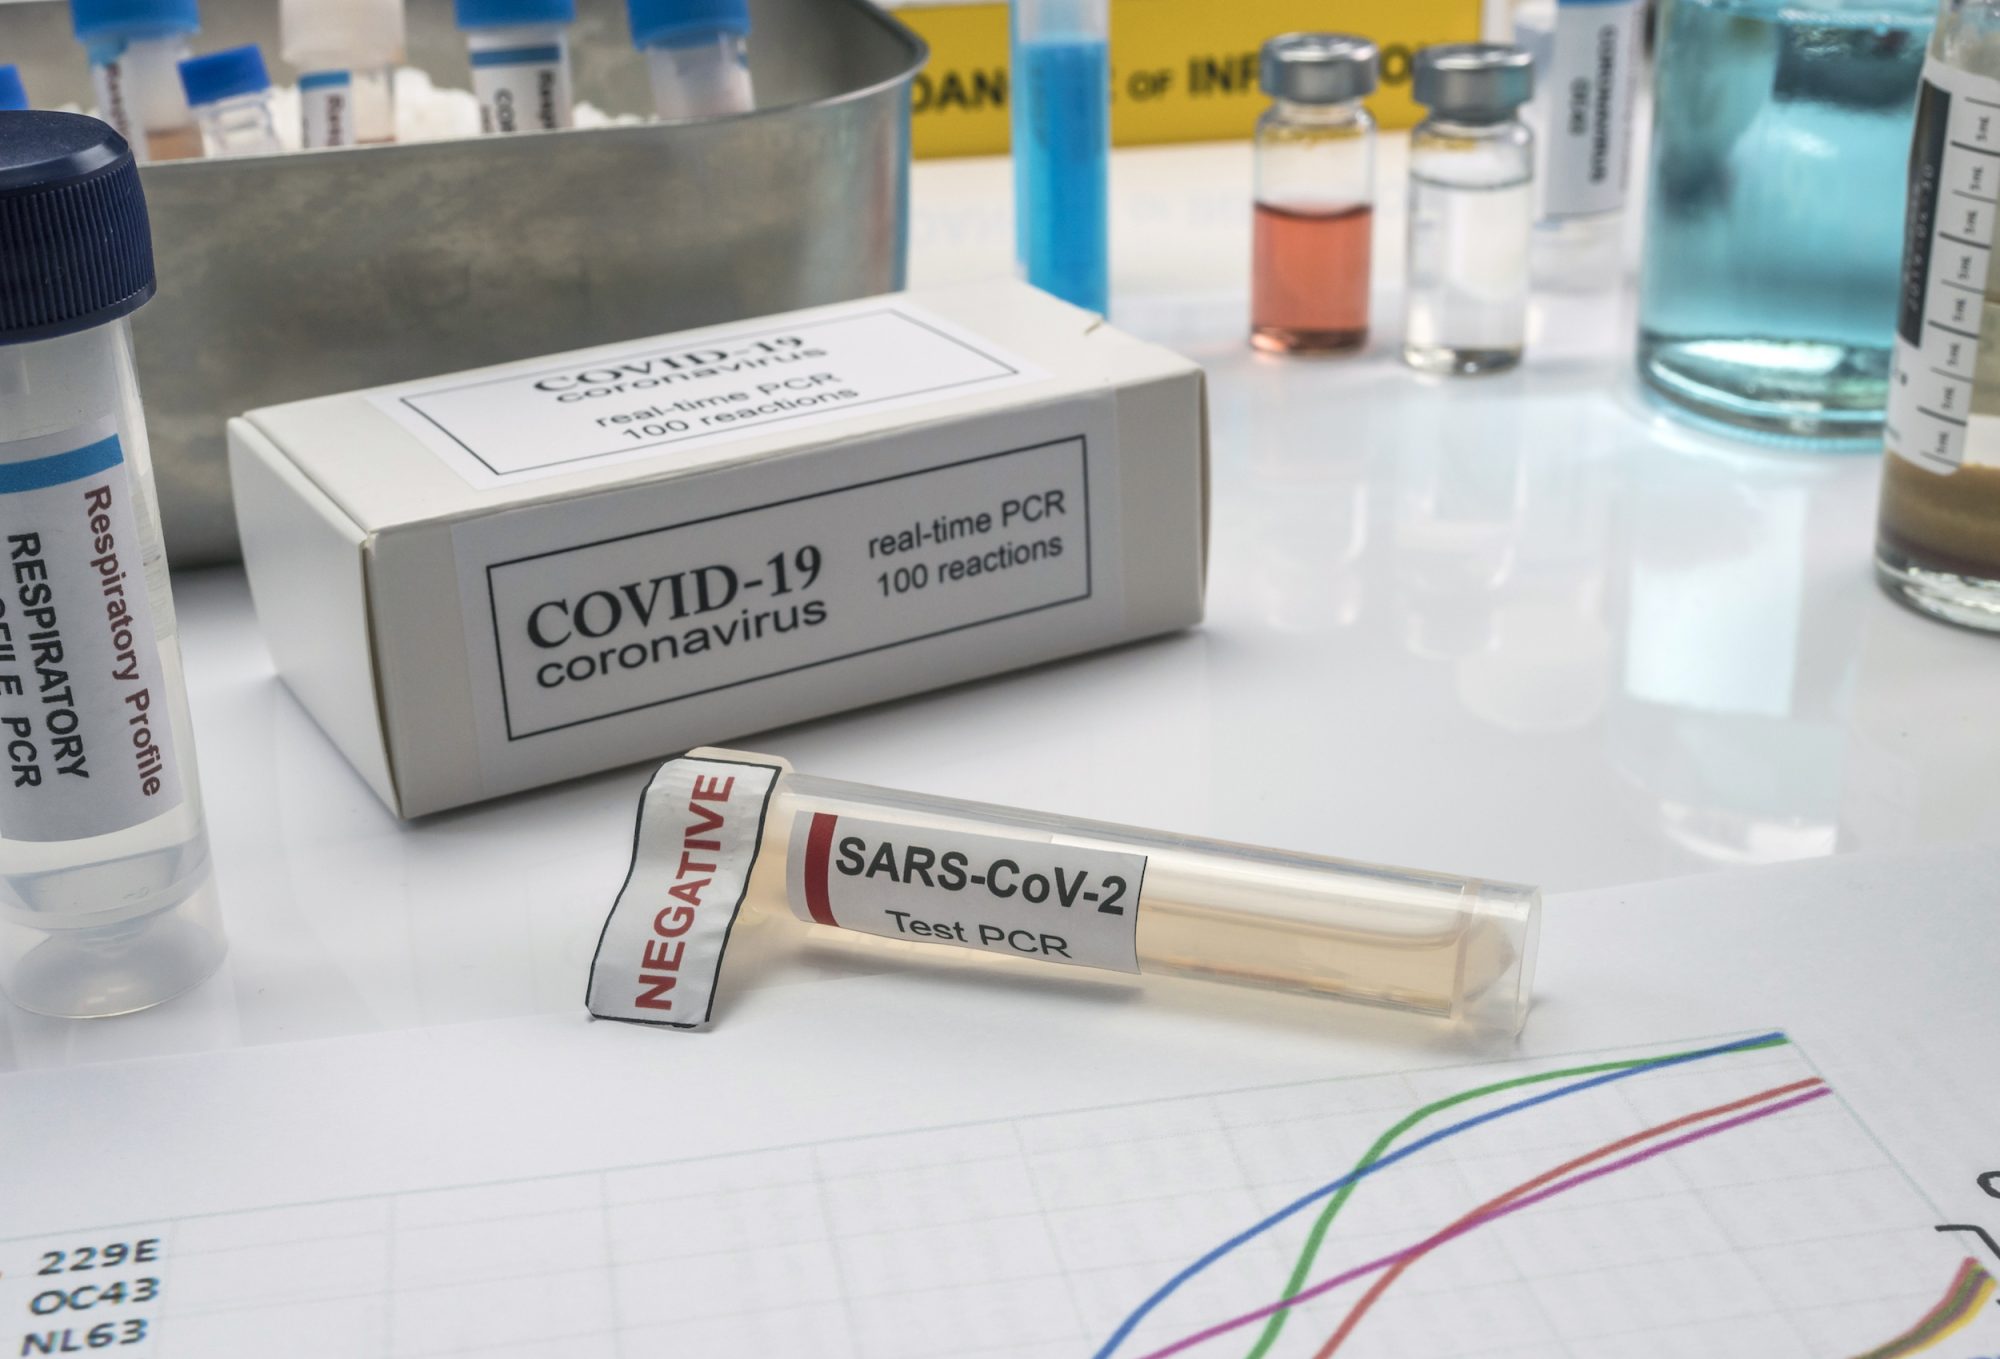 List of private health facilities approved by MoPH for Covid-19 PCR test